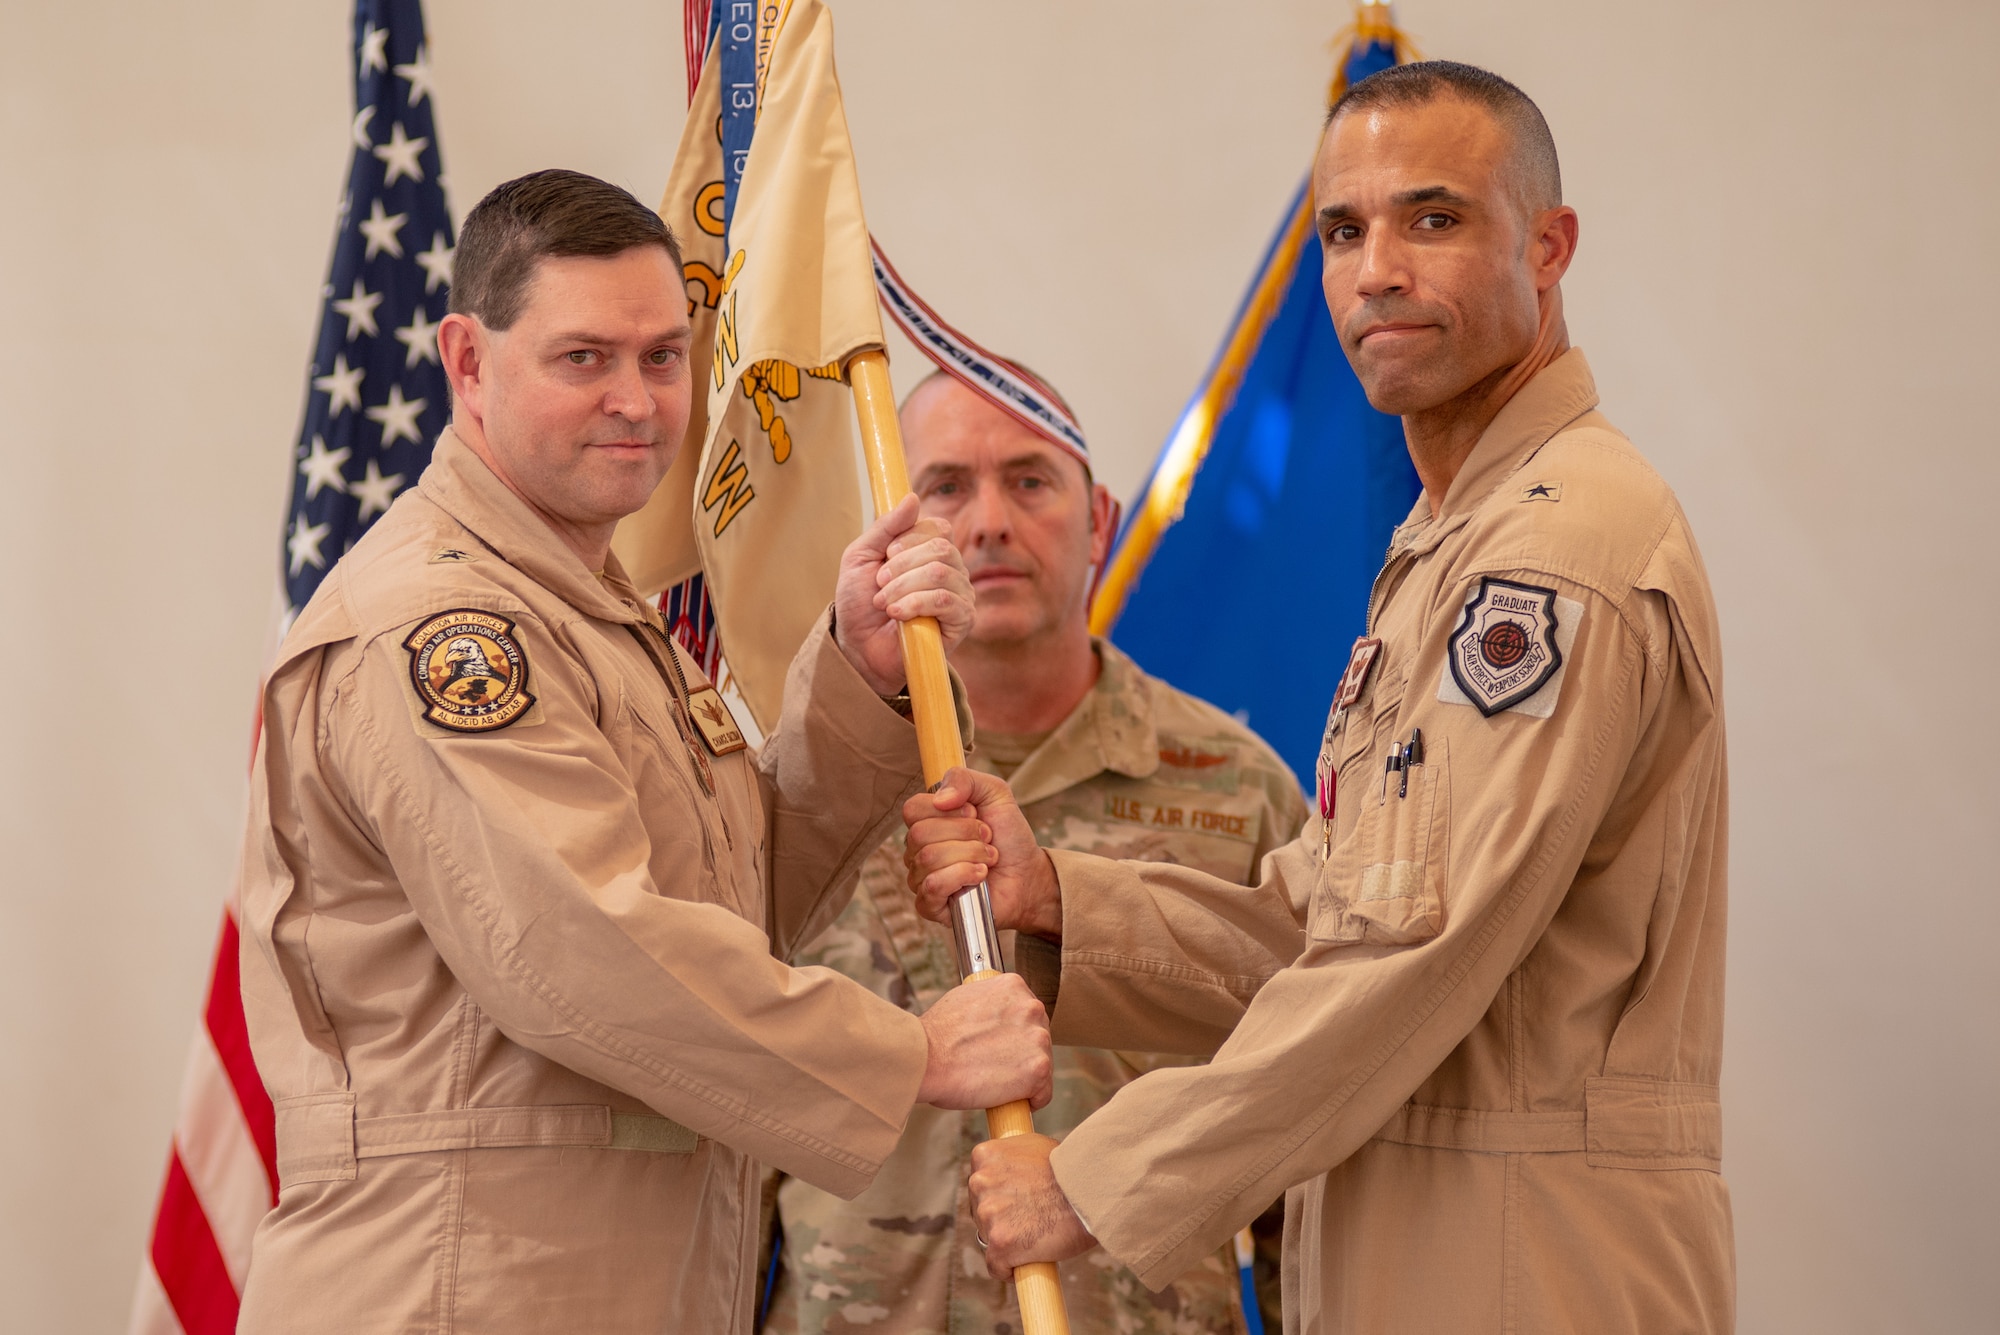 Brig. Gen. Adrian L. Spain, right, 380th Air Expeditionary Wing commander, relinquishes command during the wing change of command ceremony July 1, 2019, at Al Dhafra Air Base, United Arab Emirates.